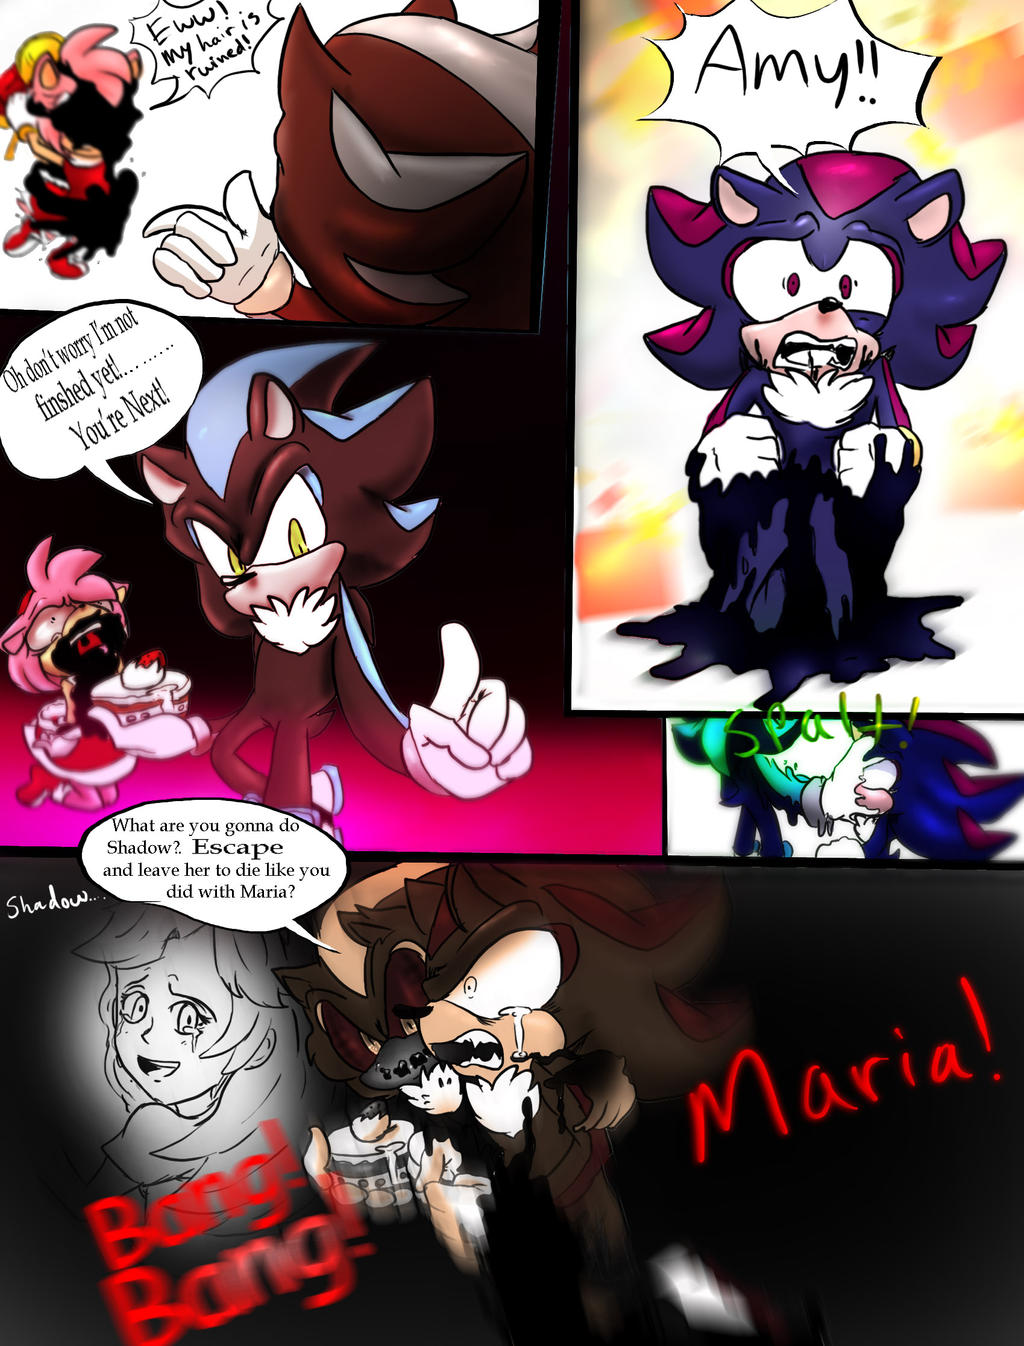 Sonic and Shadow in Equestria 2 The Return of Mephiles The Dark - Fimfiction